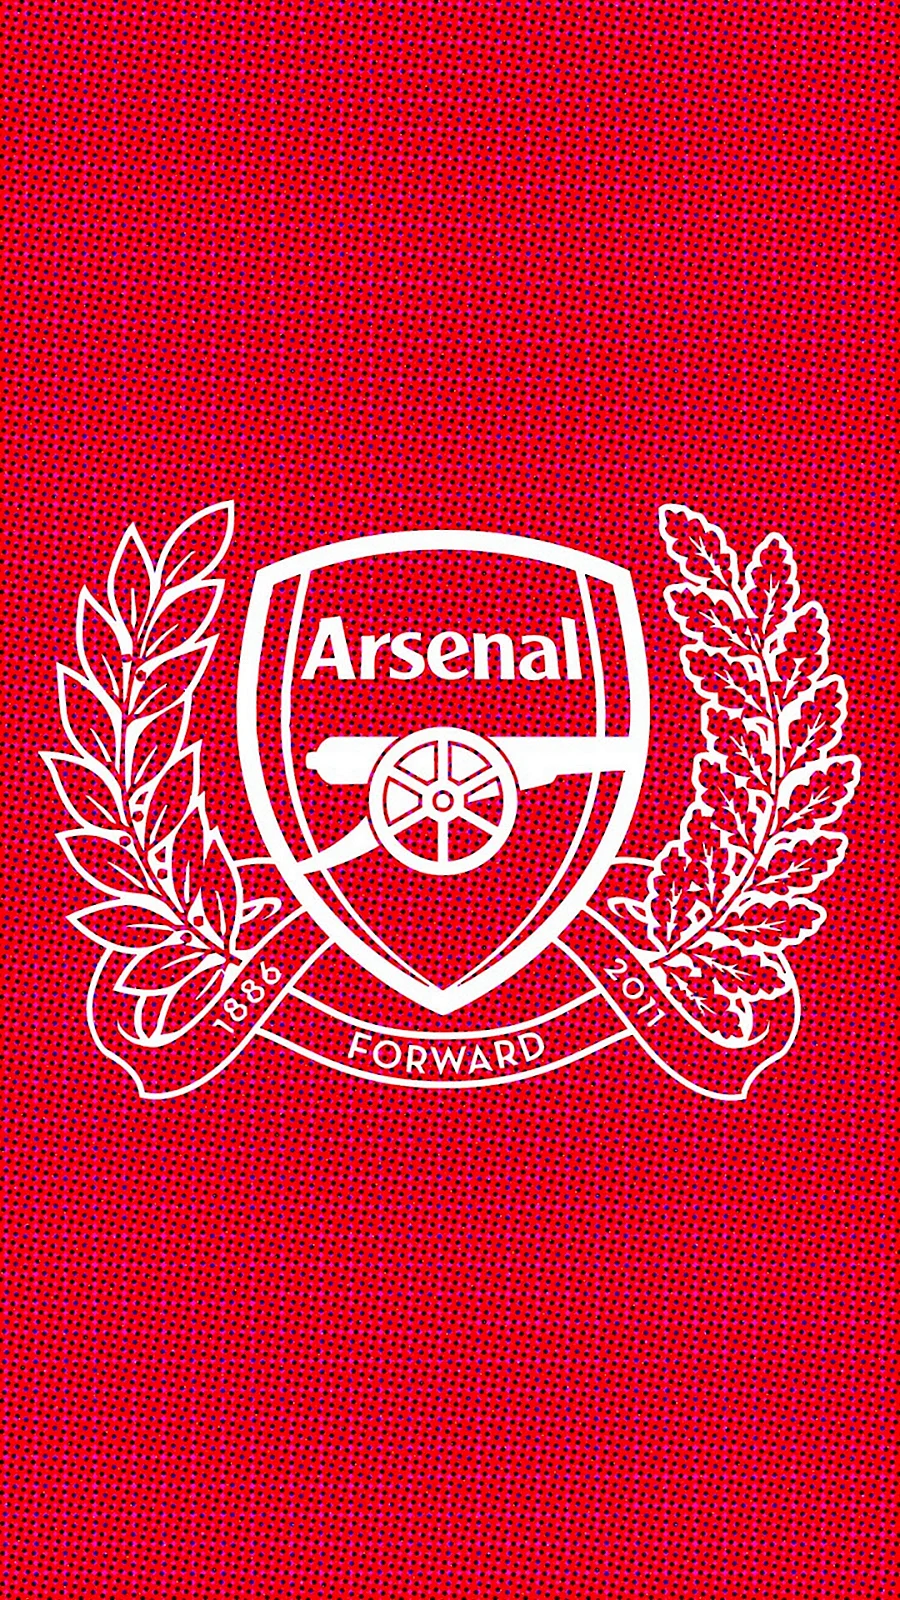 Arsenal Personalize Font Wallpaper For iPhone